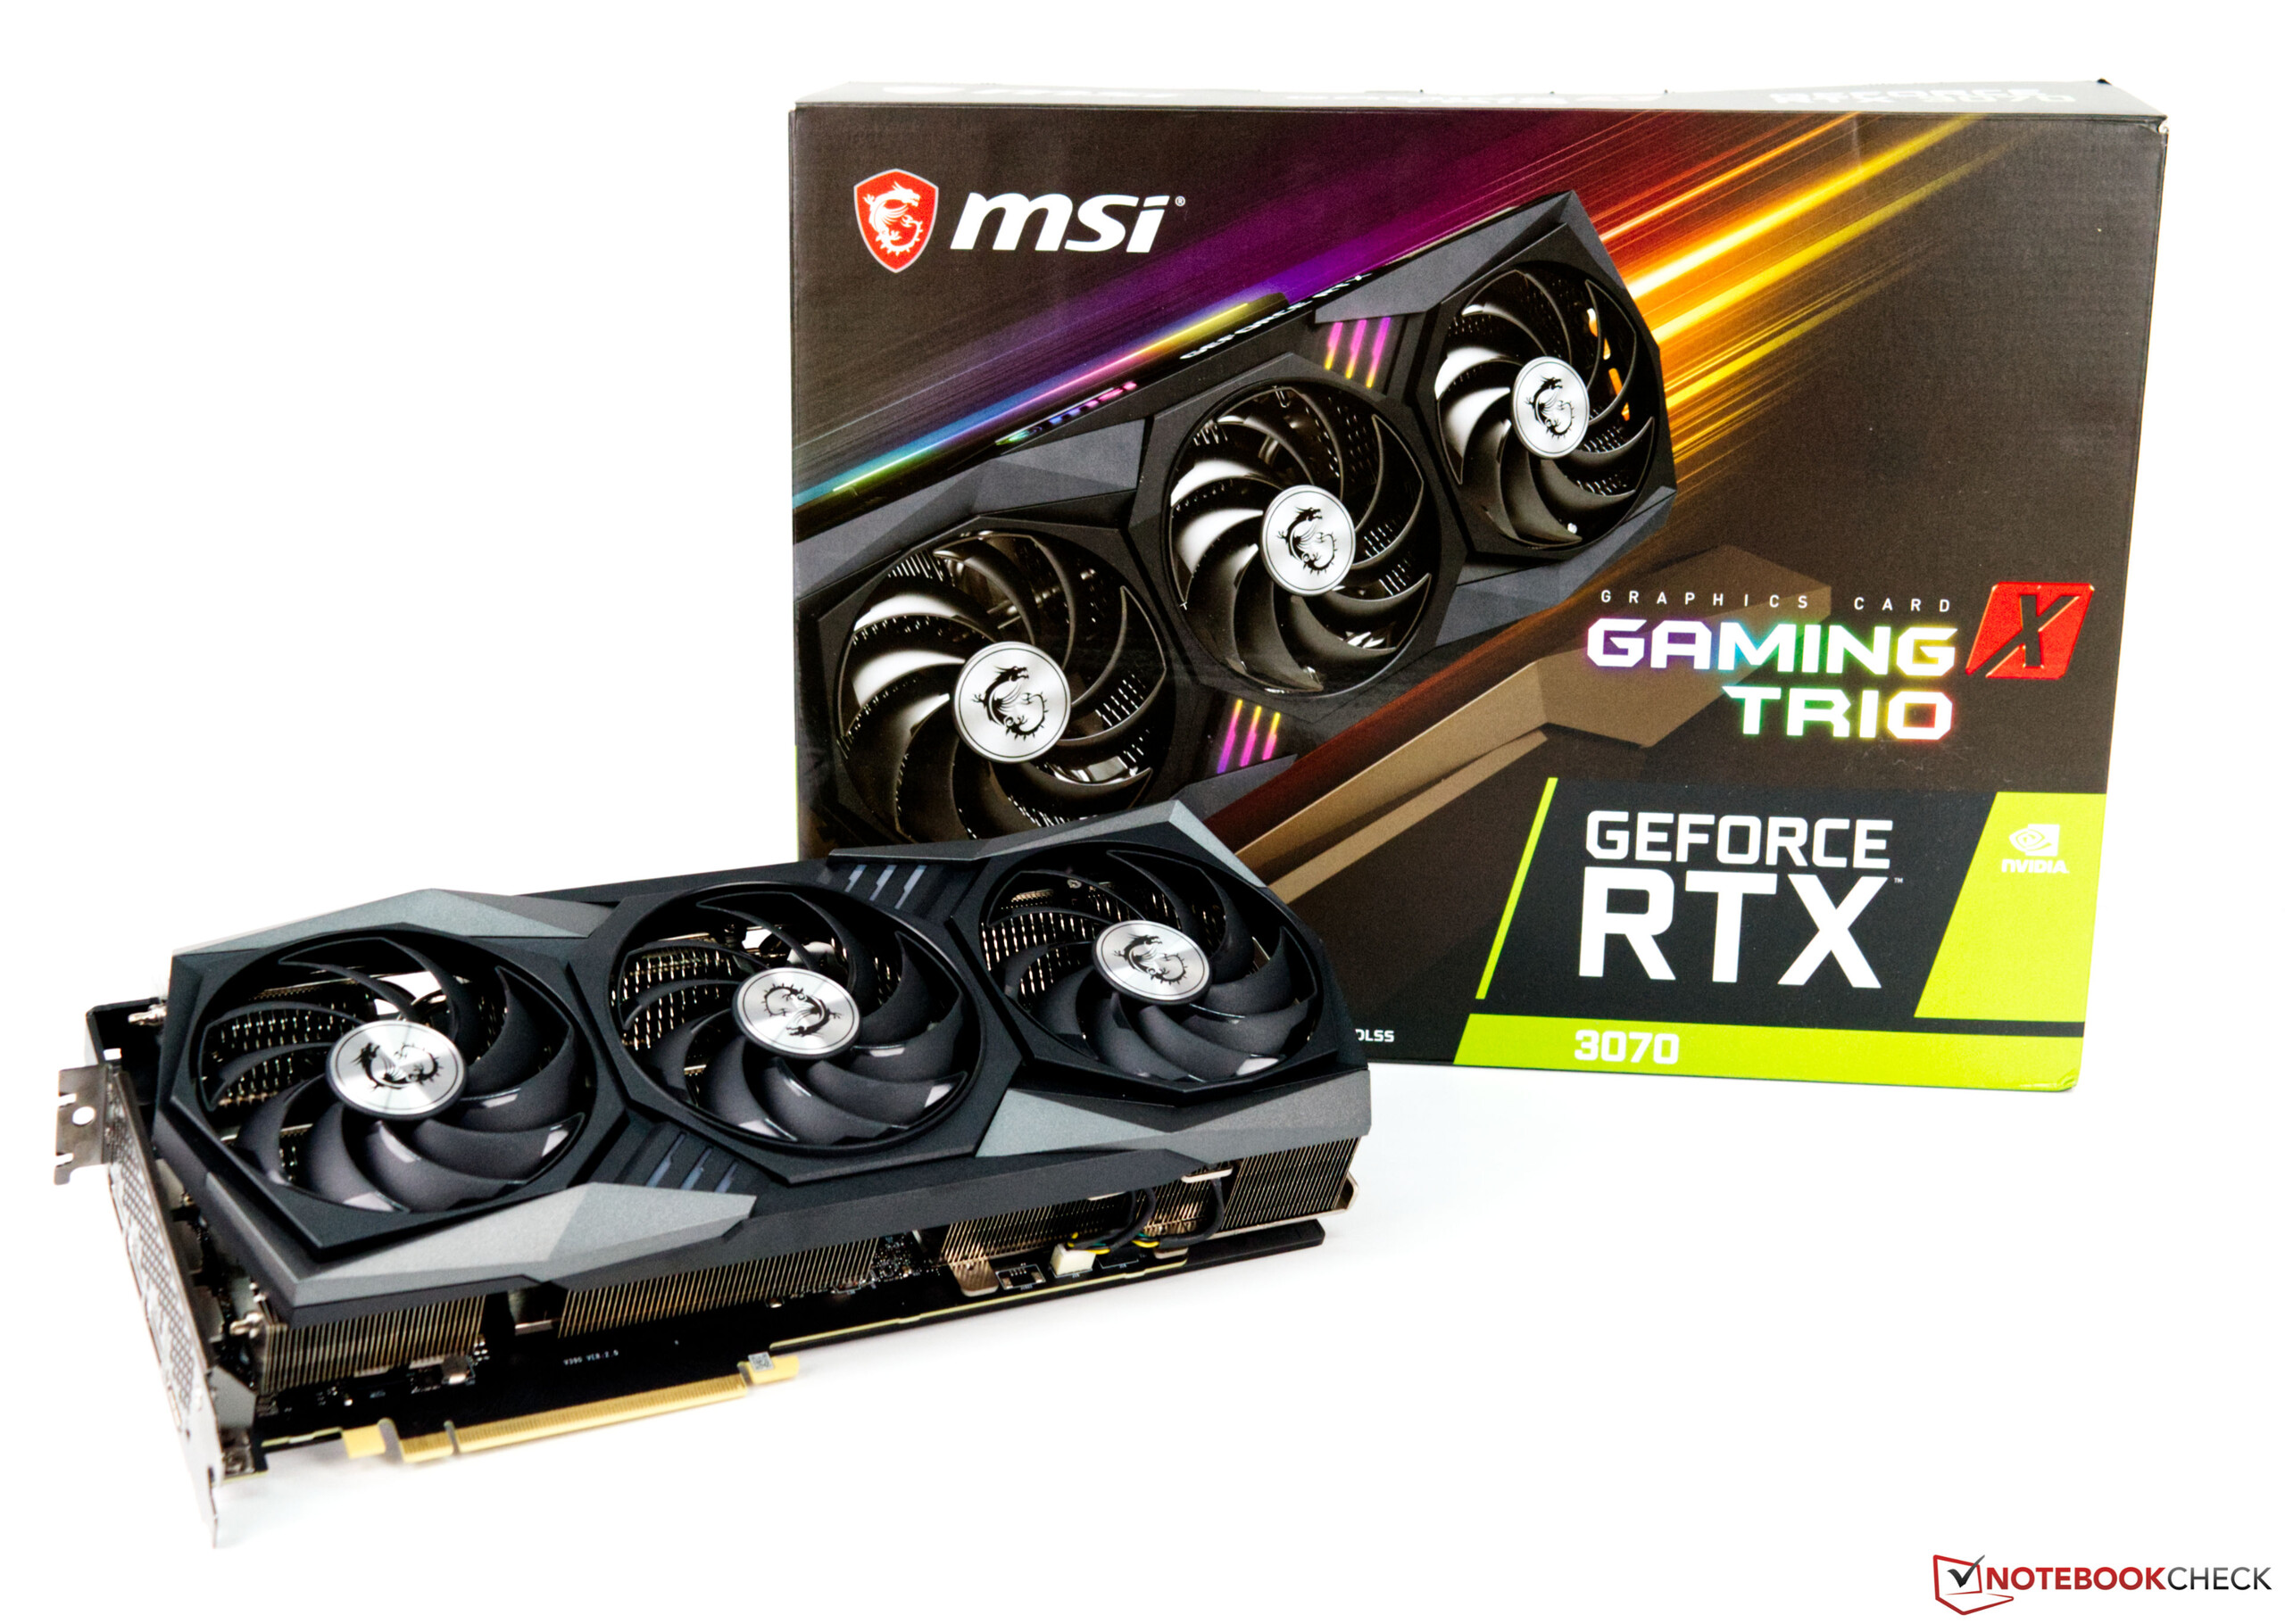 MSI GeForce RTX 3070 Gaming X Trio desktop graphics card in review ...